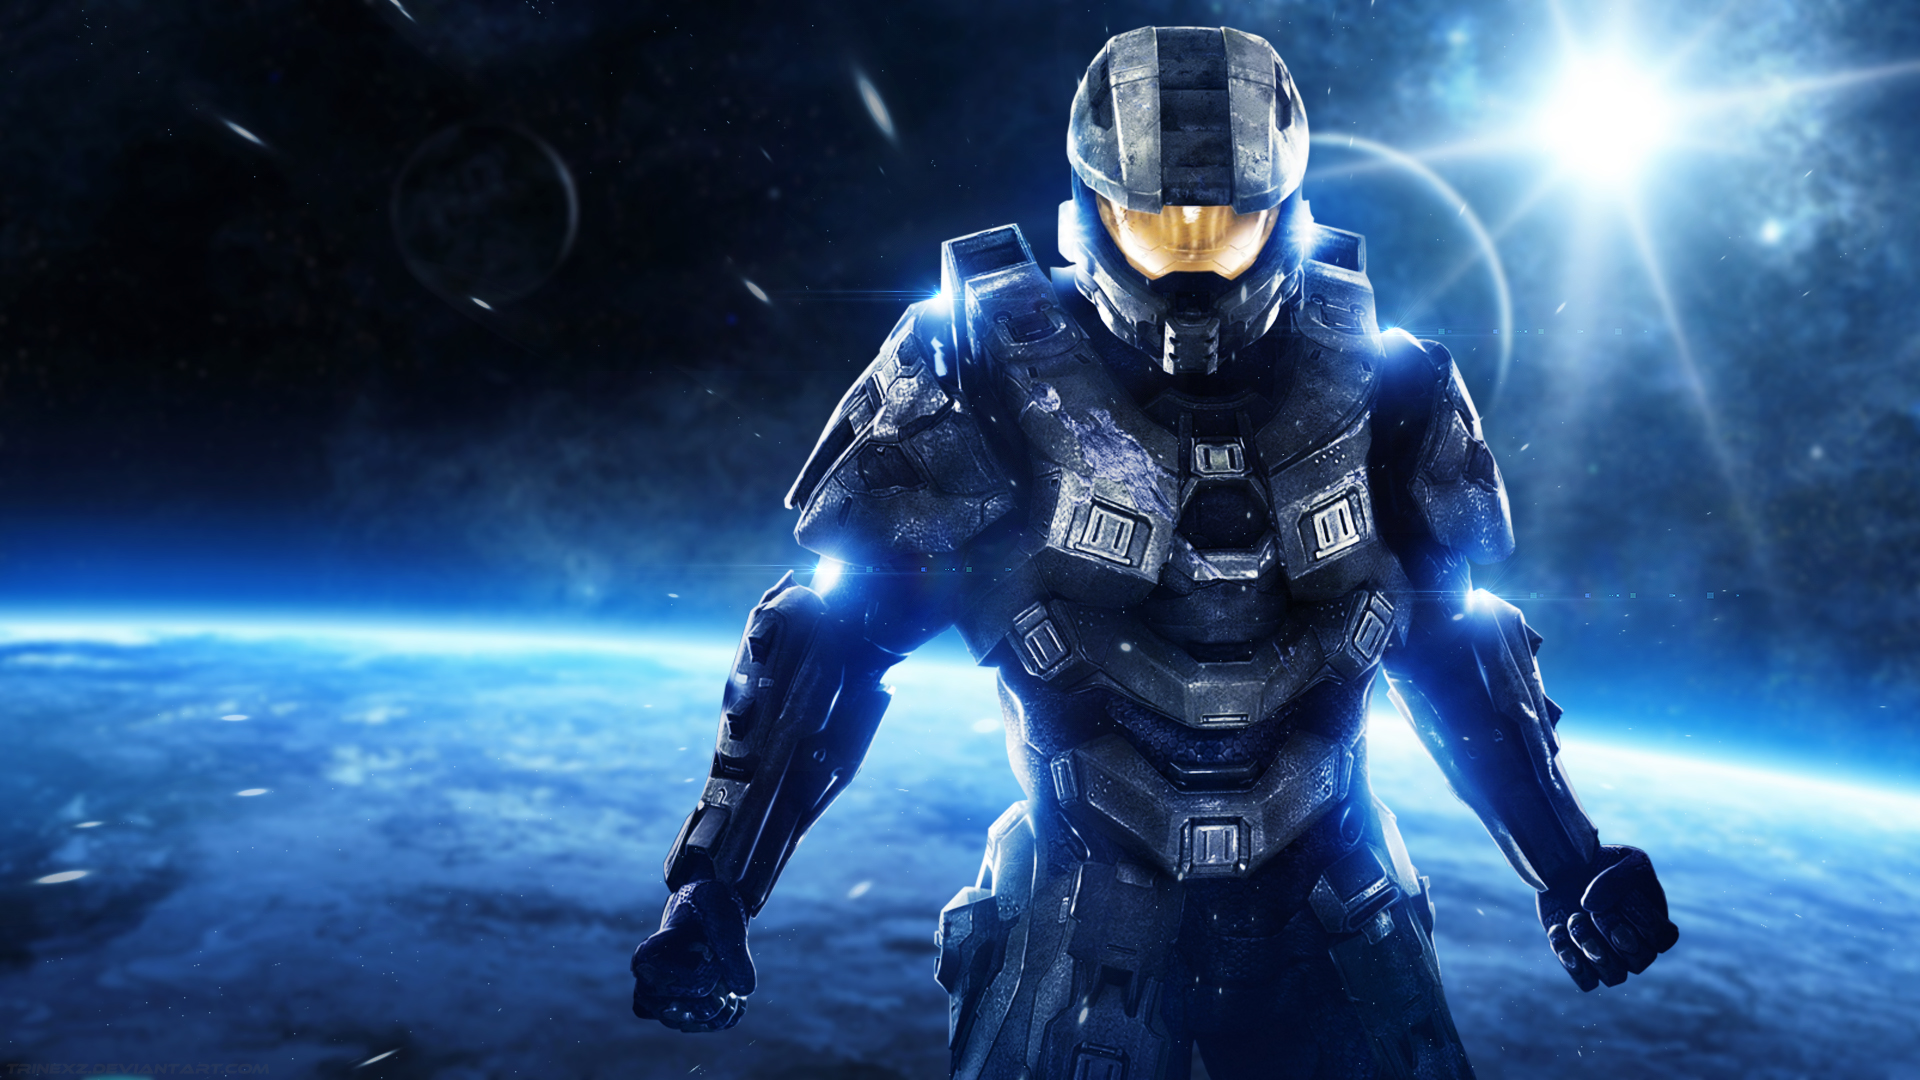 master chief wallpaper,screenshot,action adventure game,space,action figure,games